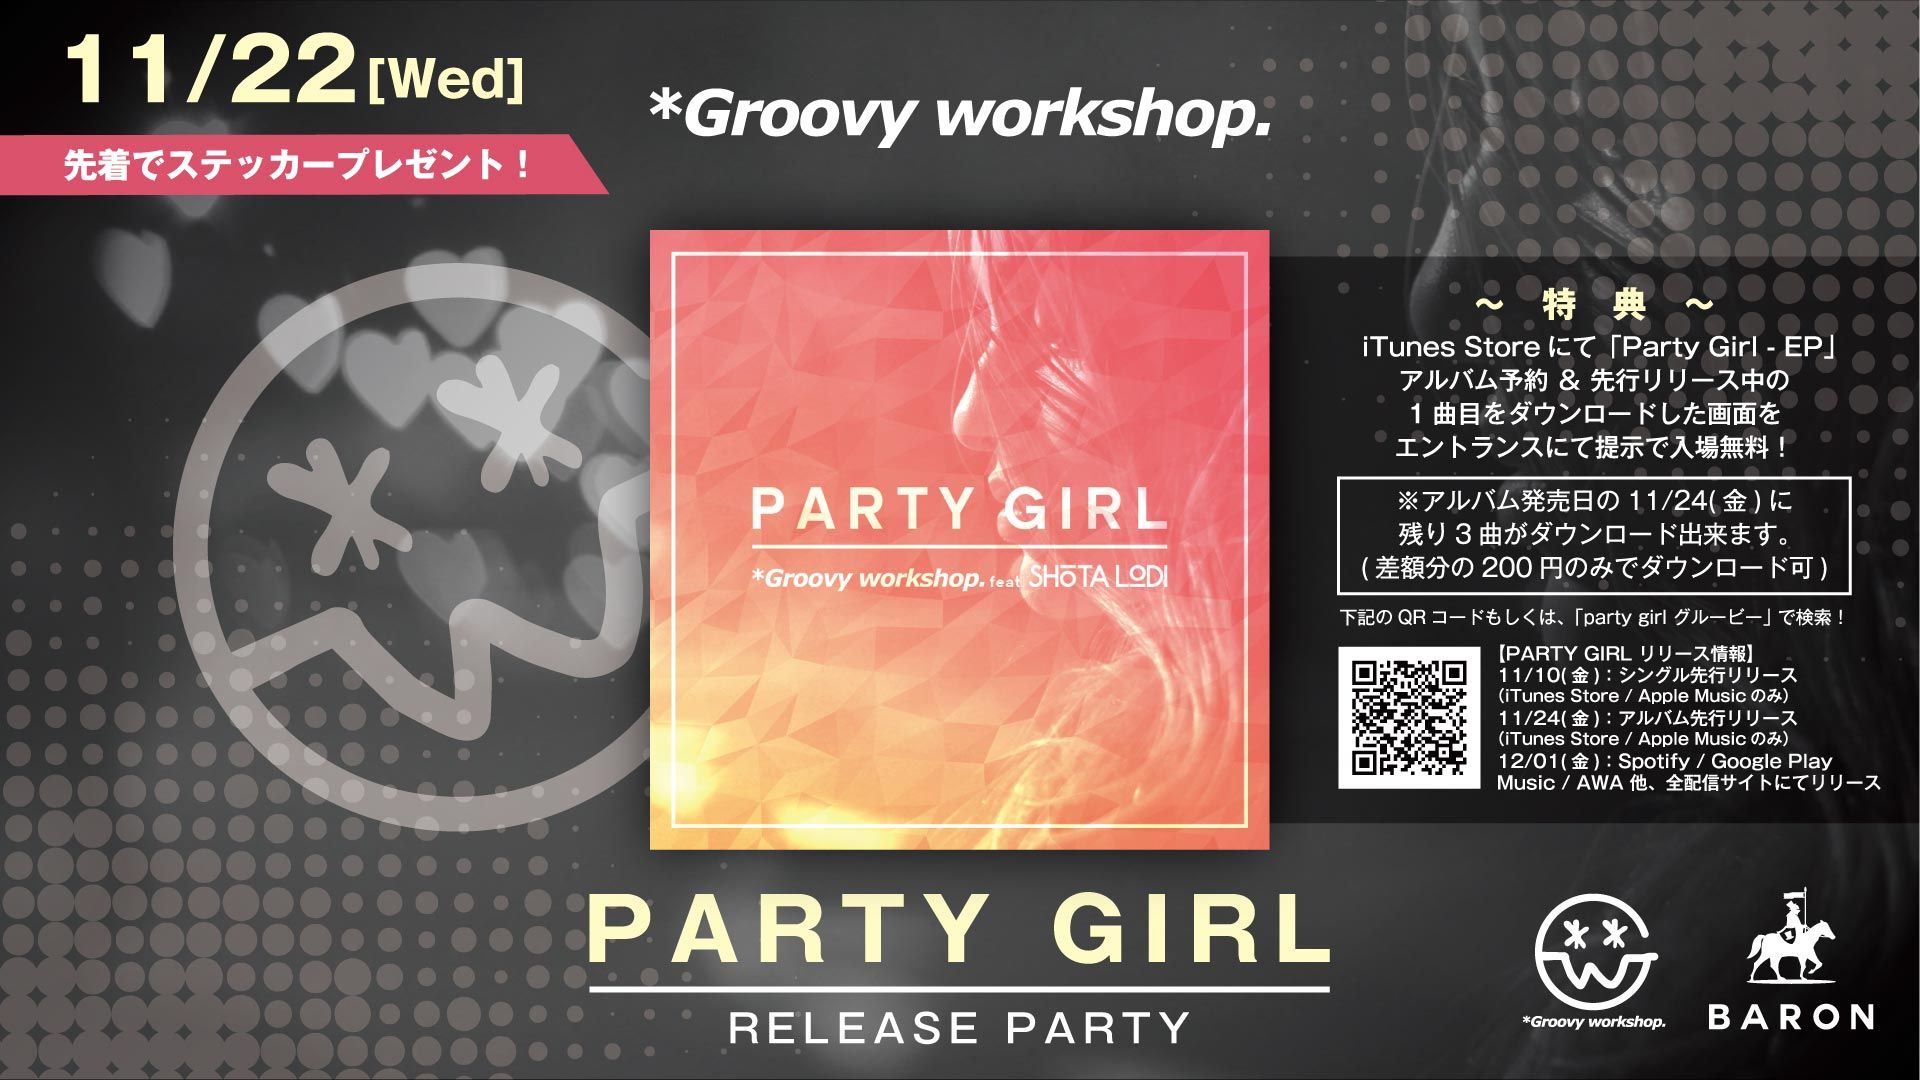 SPECIAL GUEST: *Groovy workshop. -PARTY GIRL RELEASE PARTY -